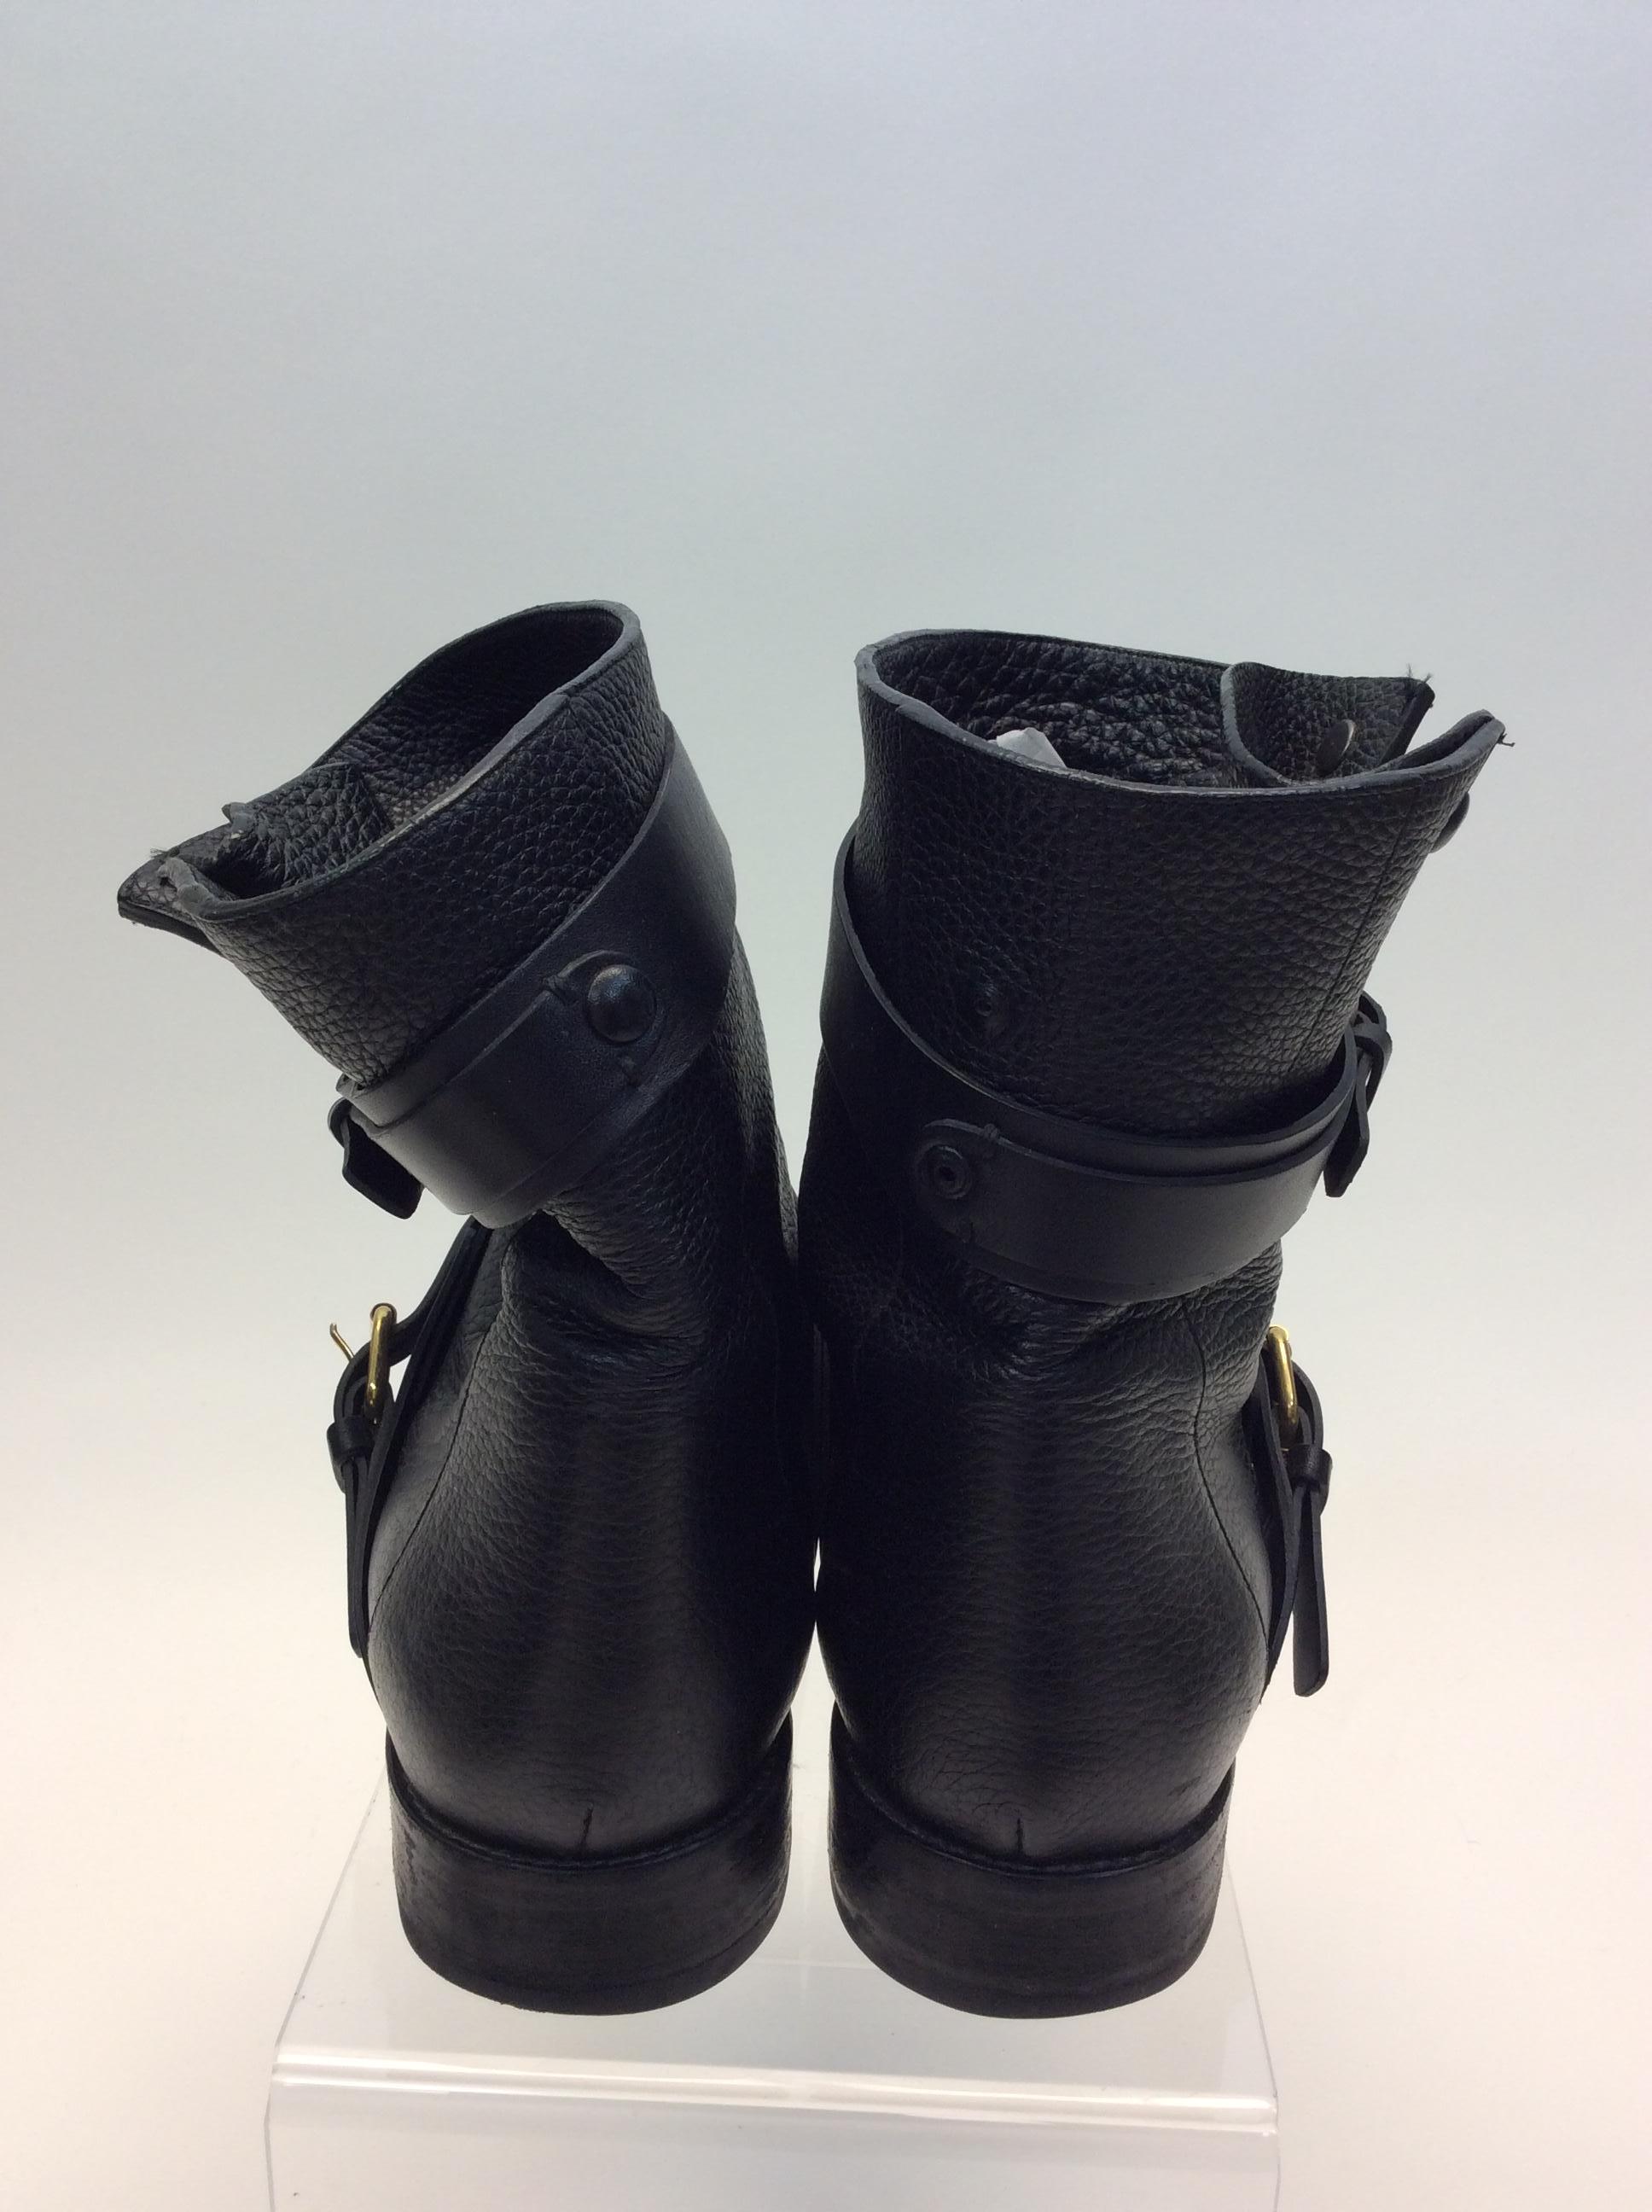 Chloe Black Leather Ankle Boot In Good Condition For Sale In Narberth, PA